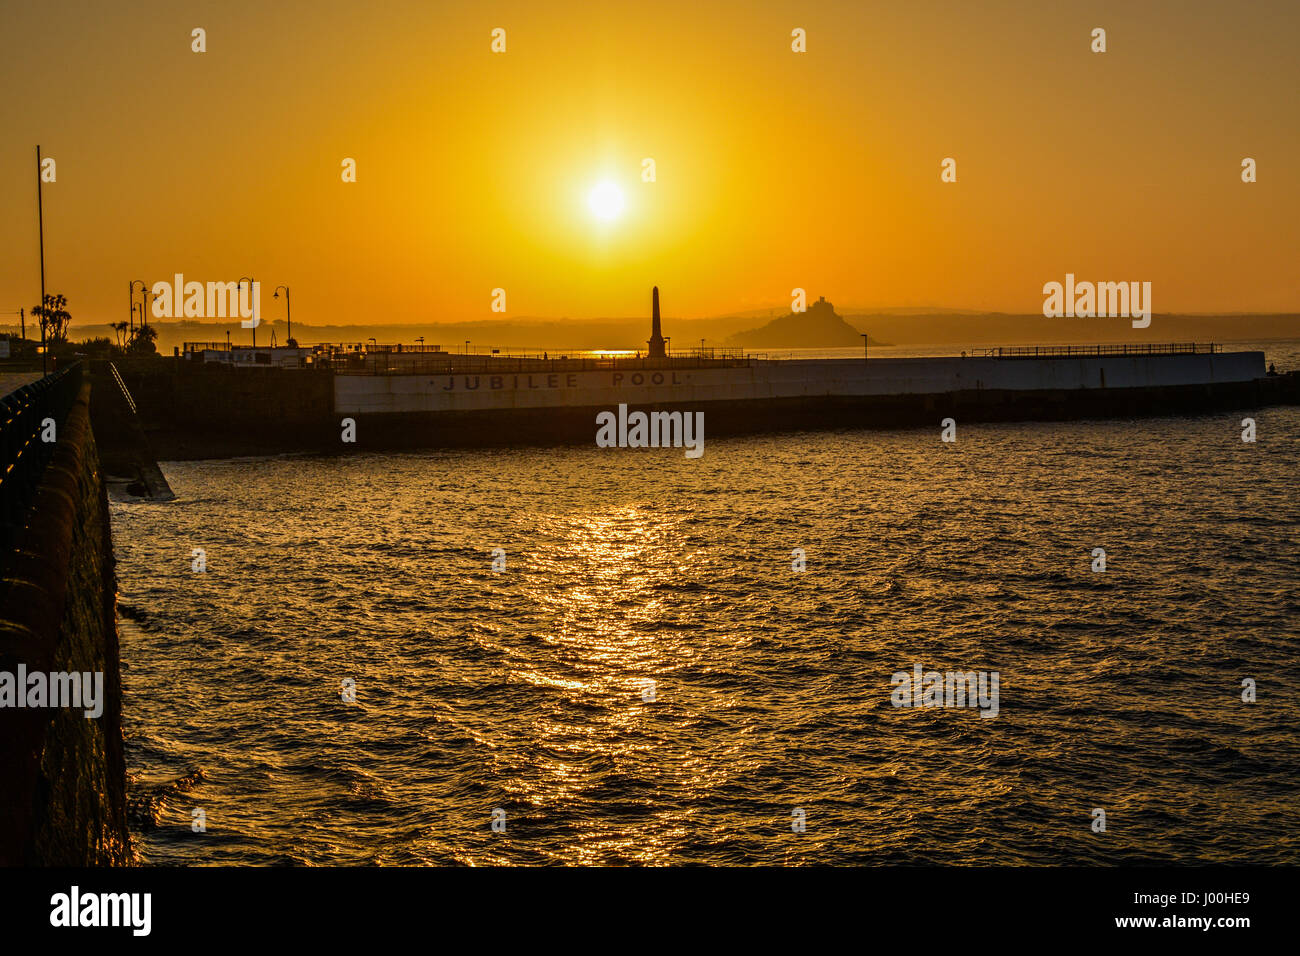 Penzance, Cornwall, UK. 8th Apr, 2017. UK Weather. The sun rises over Mounts Bay, and the Jubilee Pool - the outdoor Lido swimming pool, which has been closed for more refurbishment. Early morning haze lngered on the horizon, bringing a vivid orange glow around the sun. Credit: Simon Maycock/Alamy Live News Stock Photo